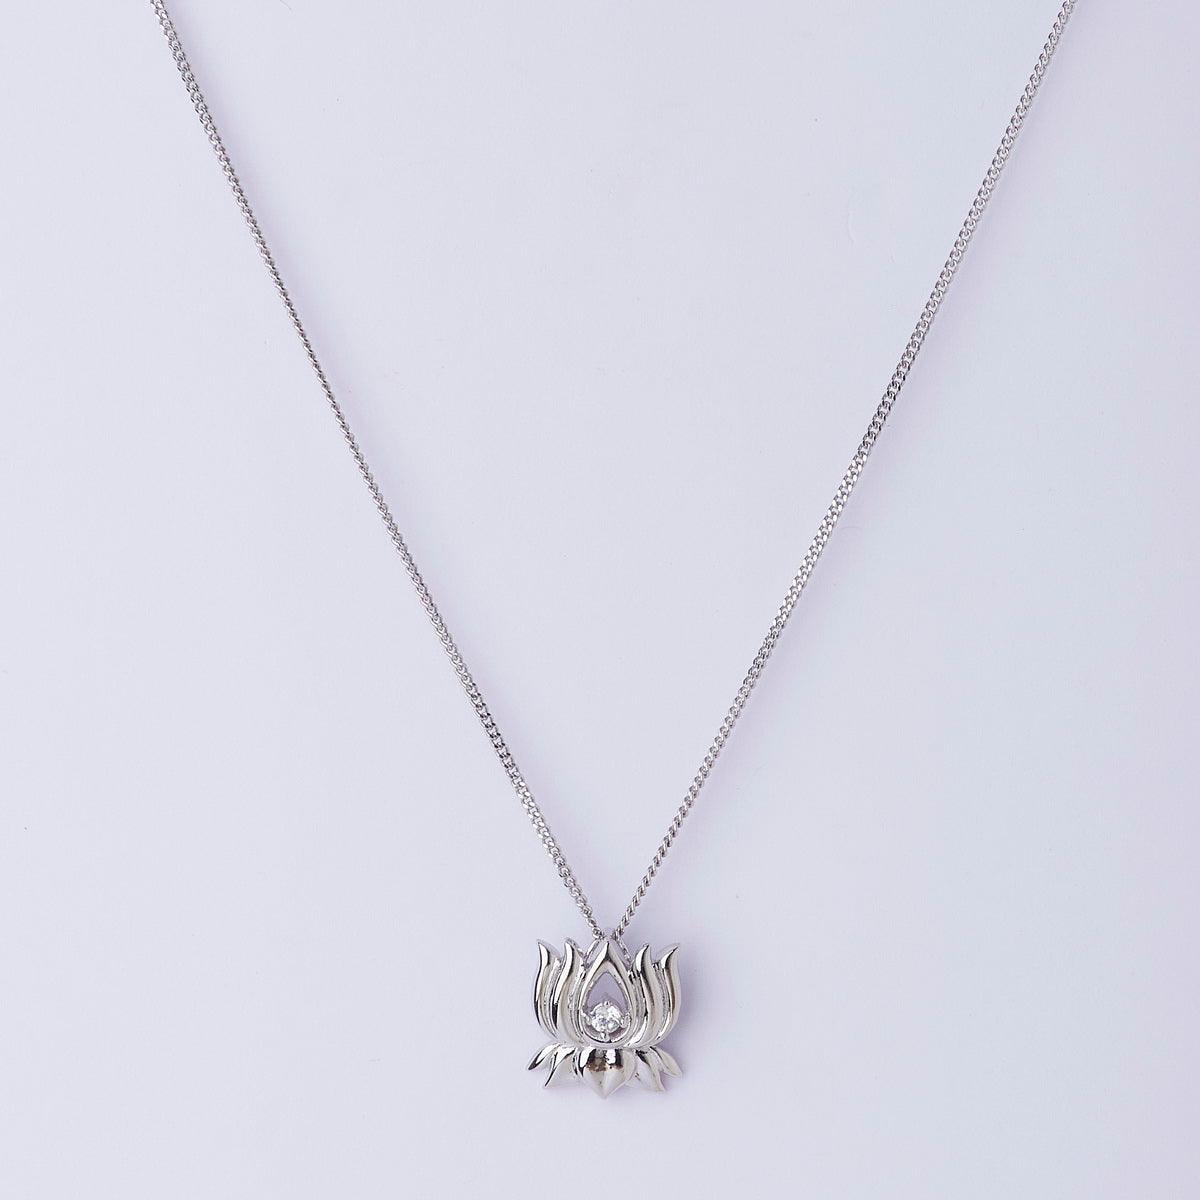 Lotus Silver Pendant with chain - Chandrani Pearls